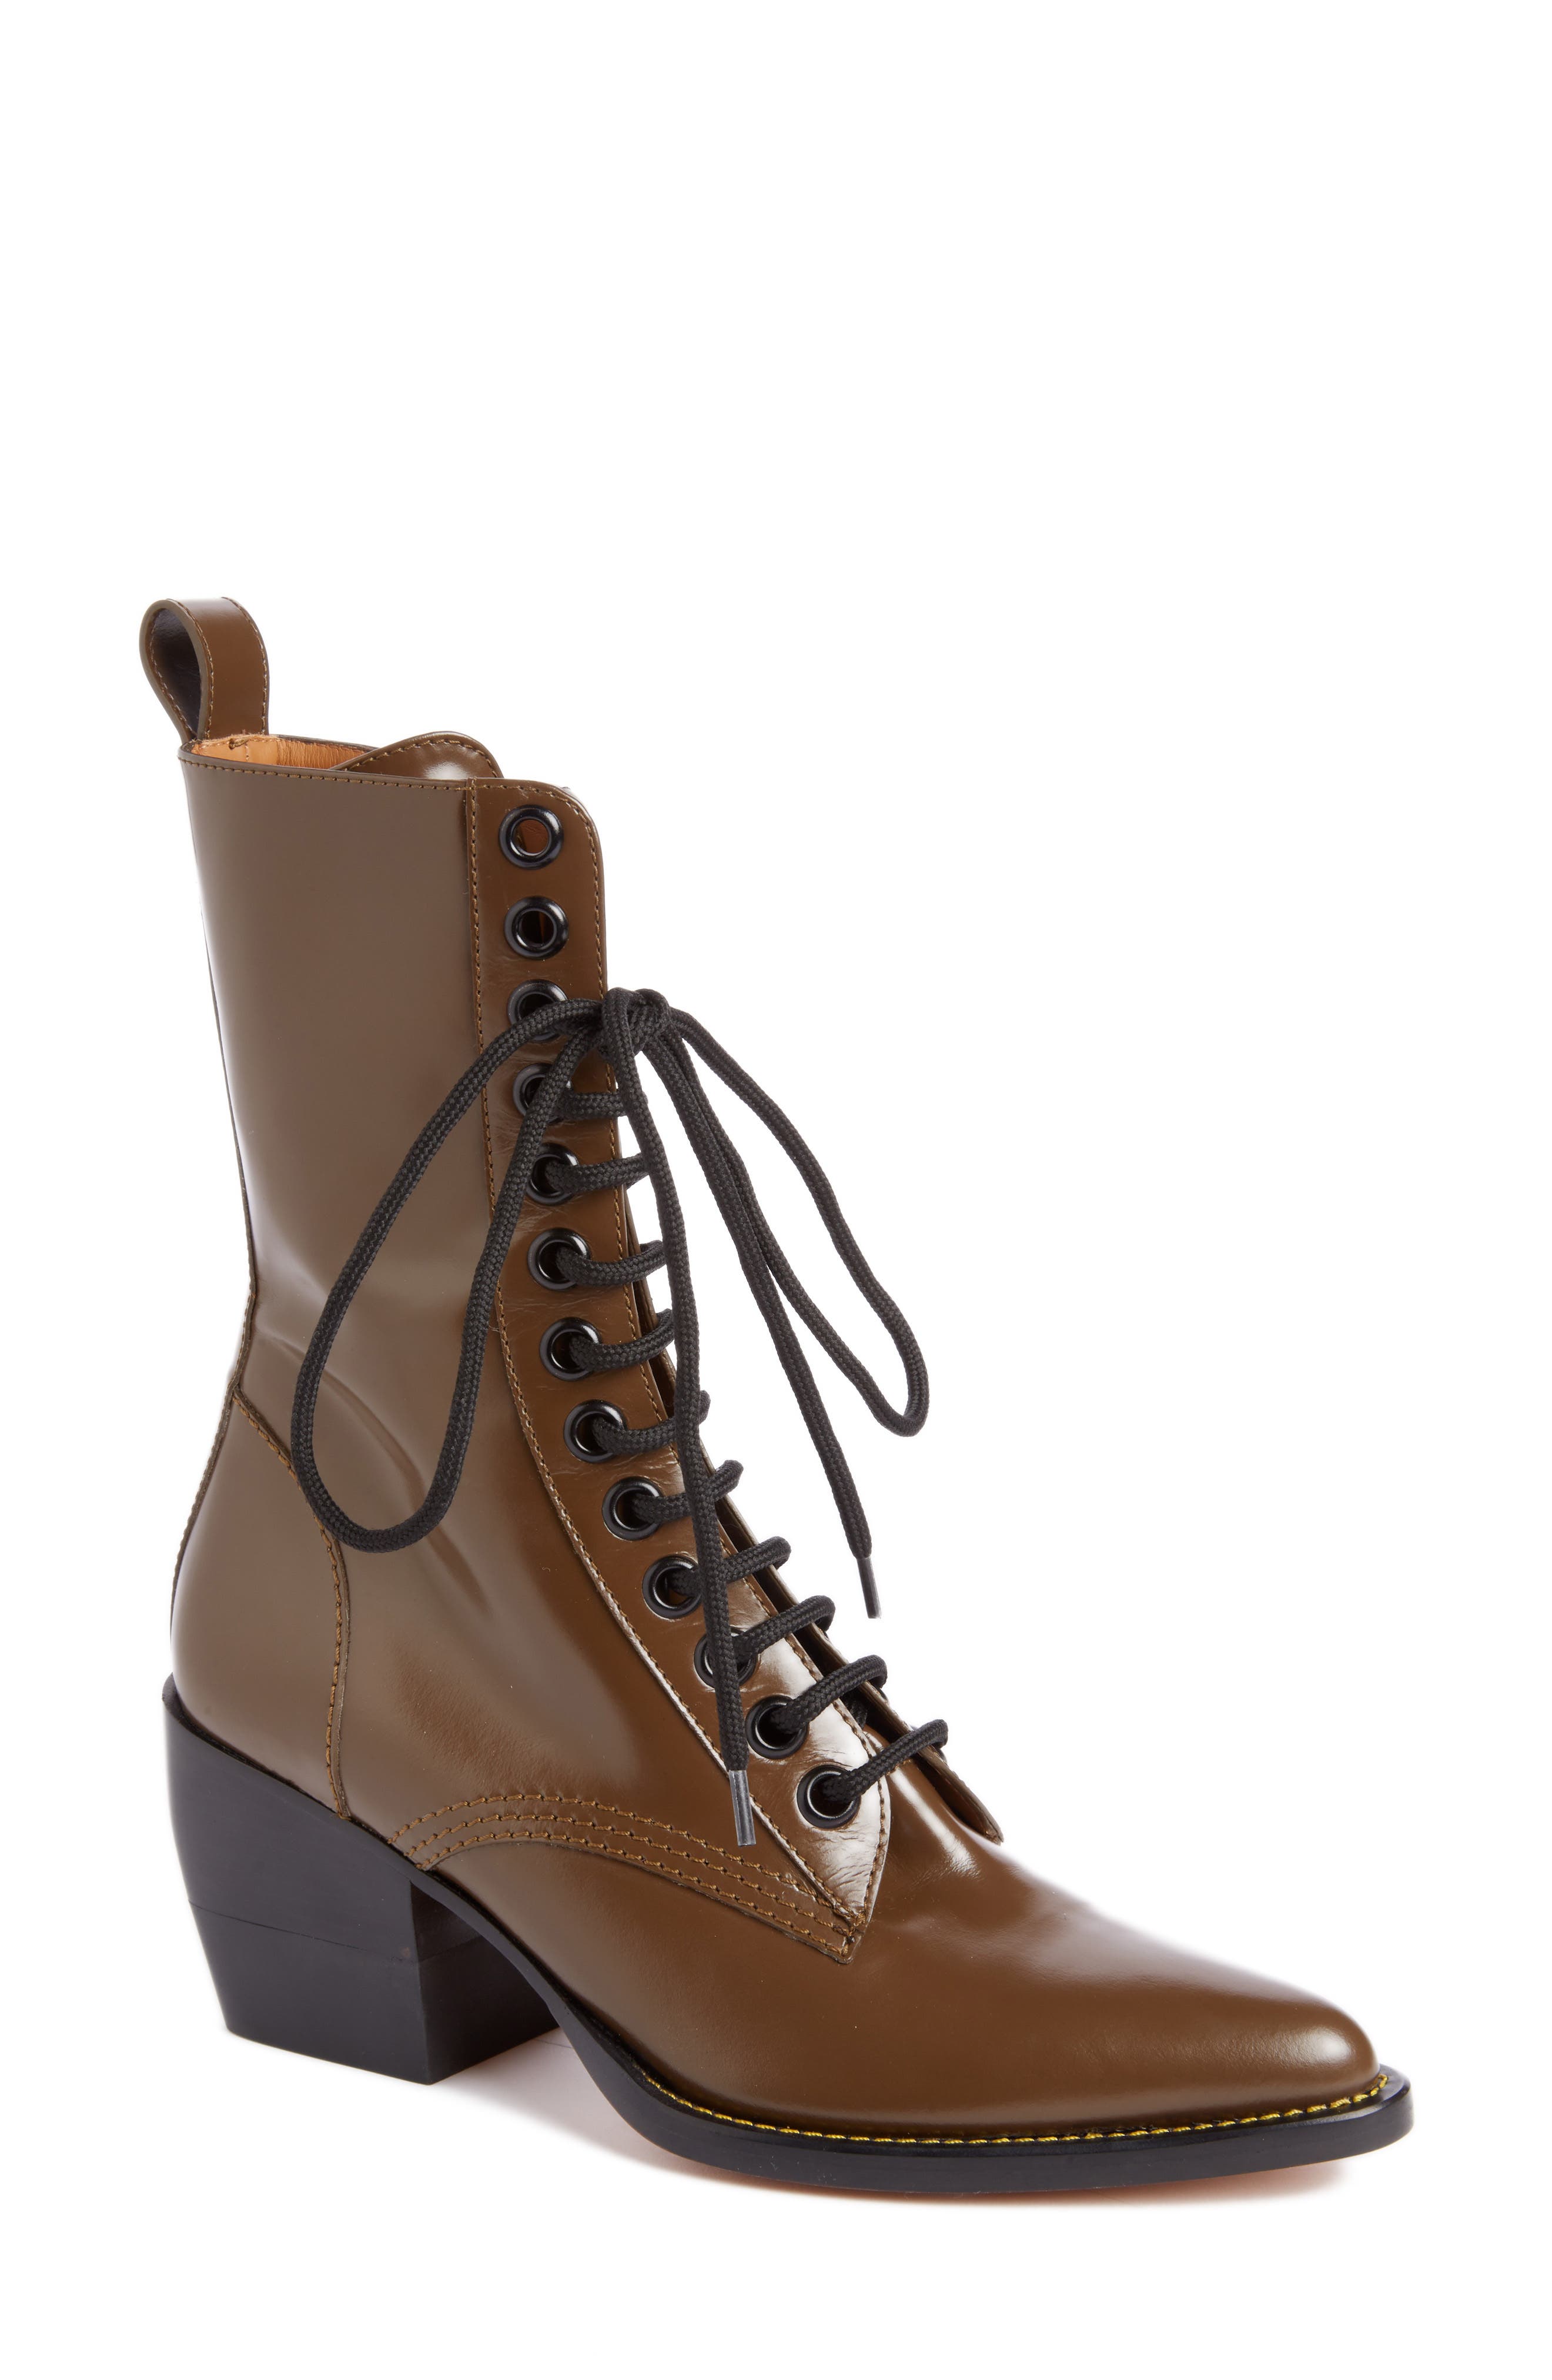 chloe boots lace up